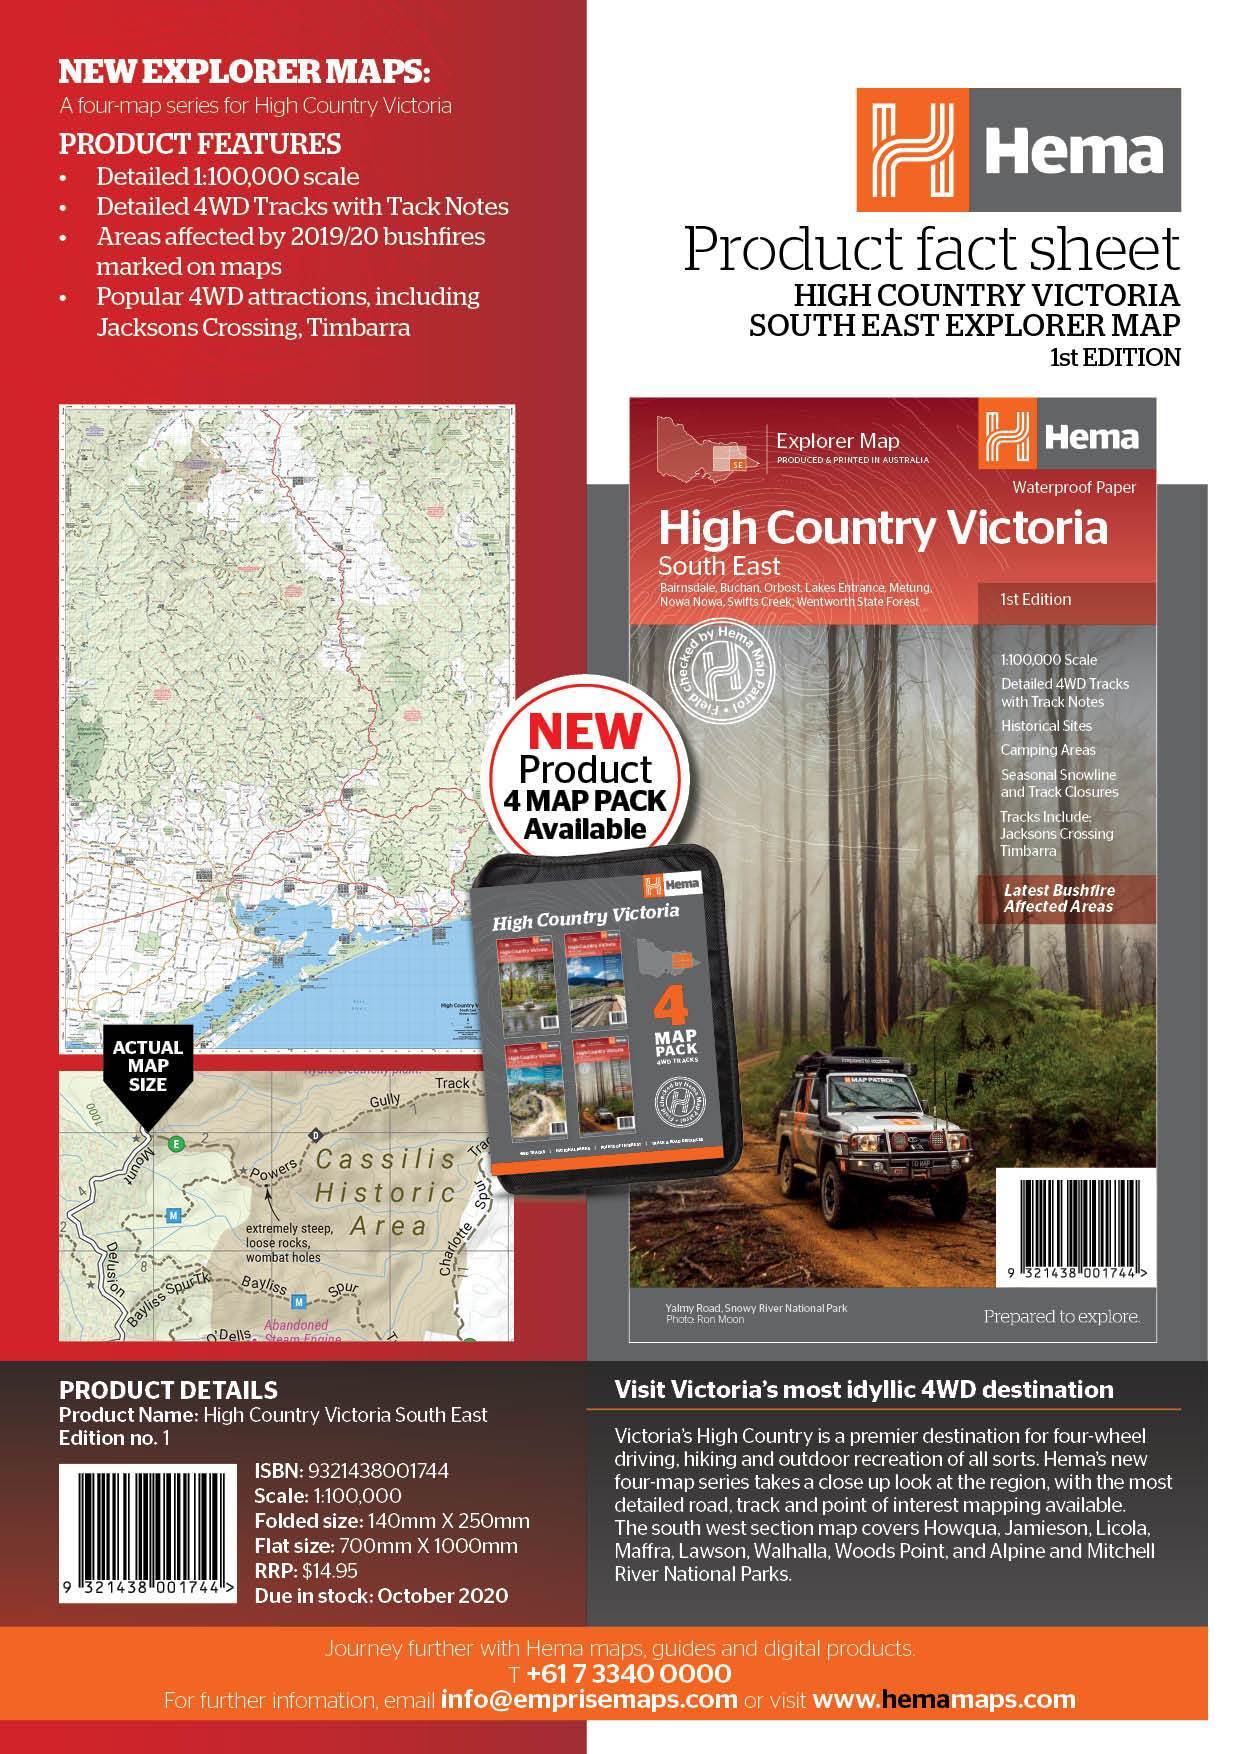 Hema The Victorian High Country - South Eastern Map 1st Edition | Hema